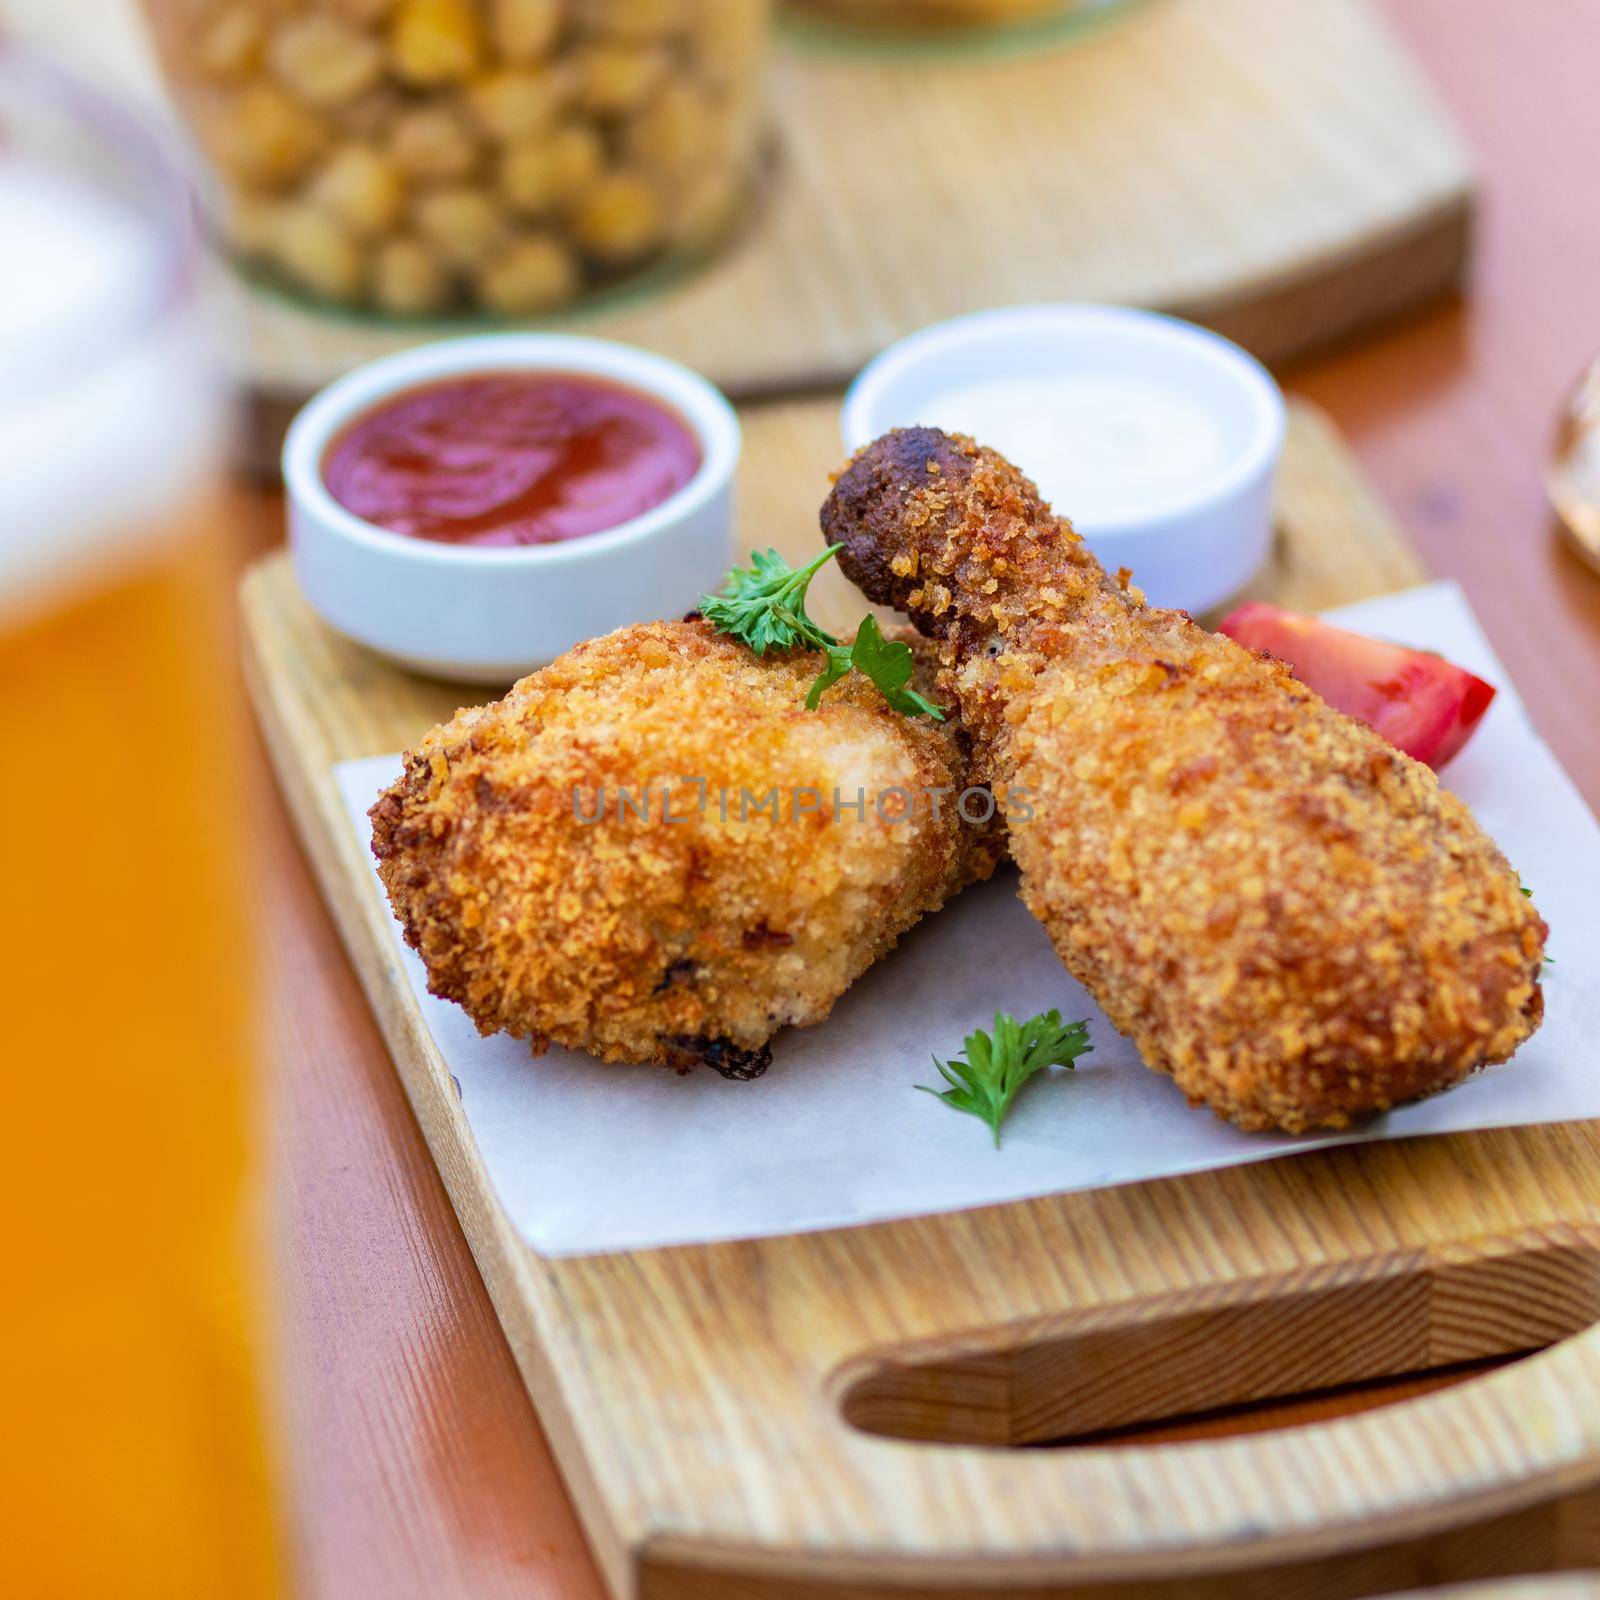 Fried chicken meal with beer and sauce by ferhad